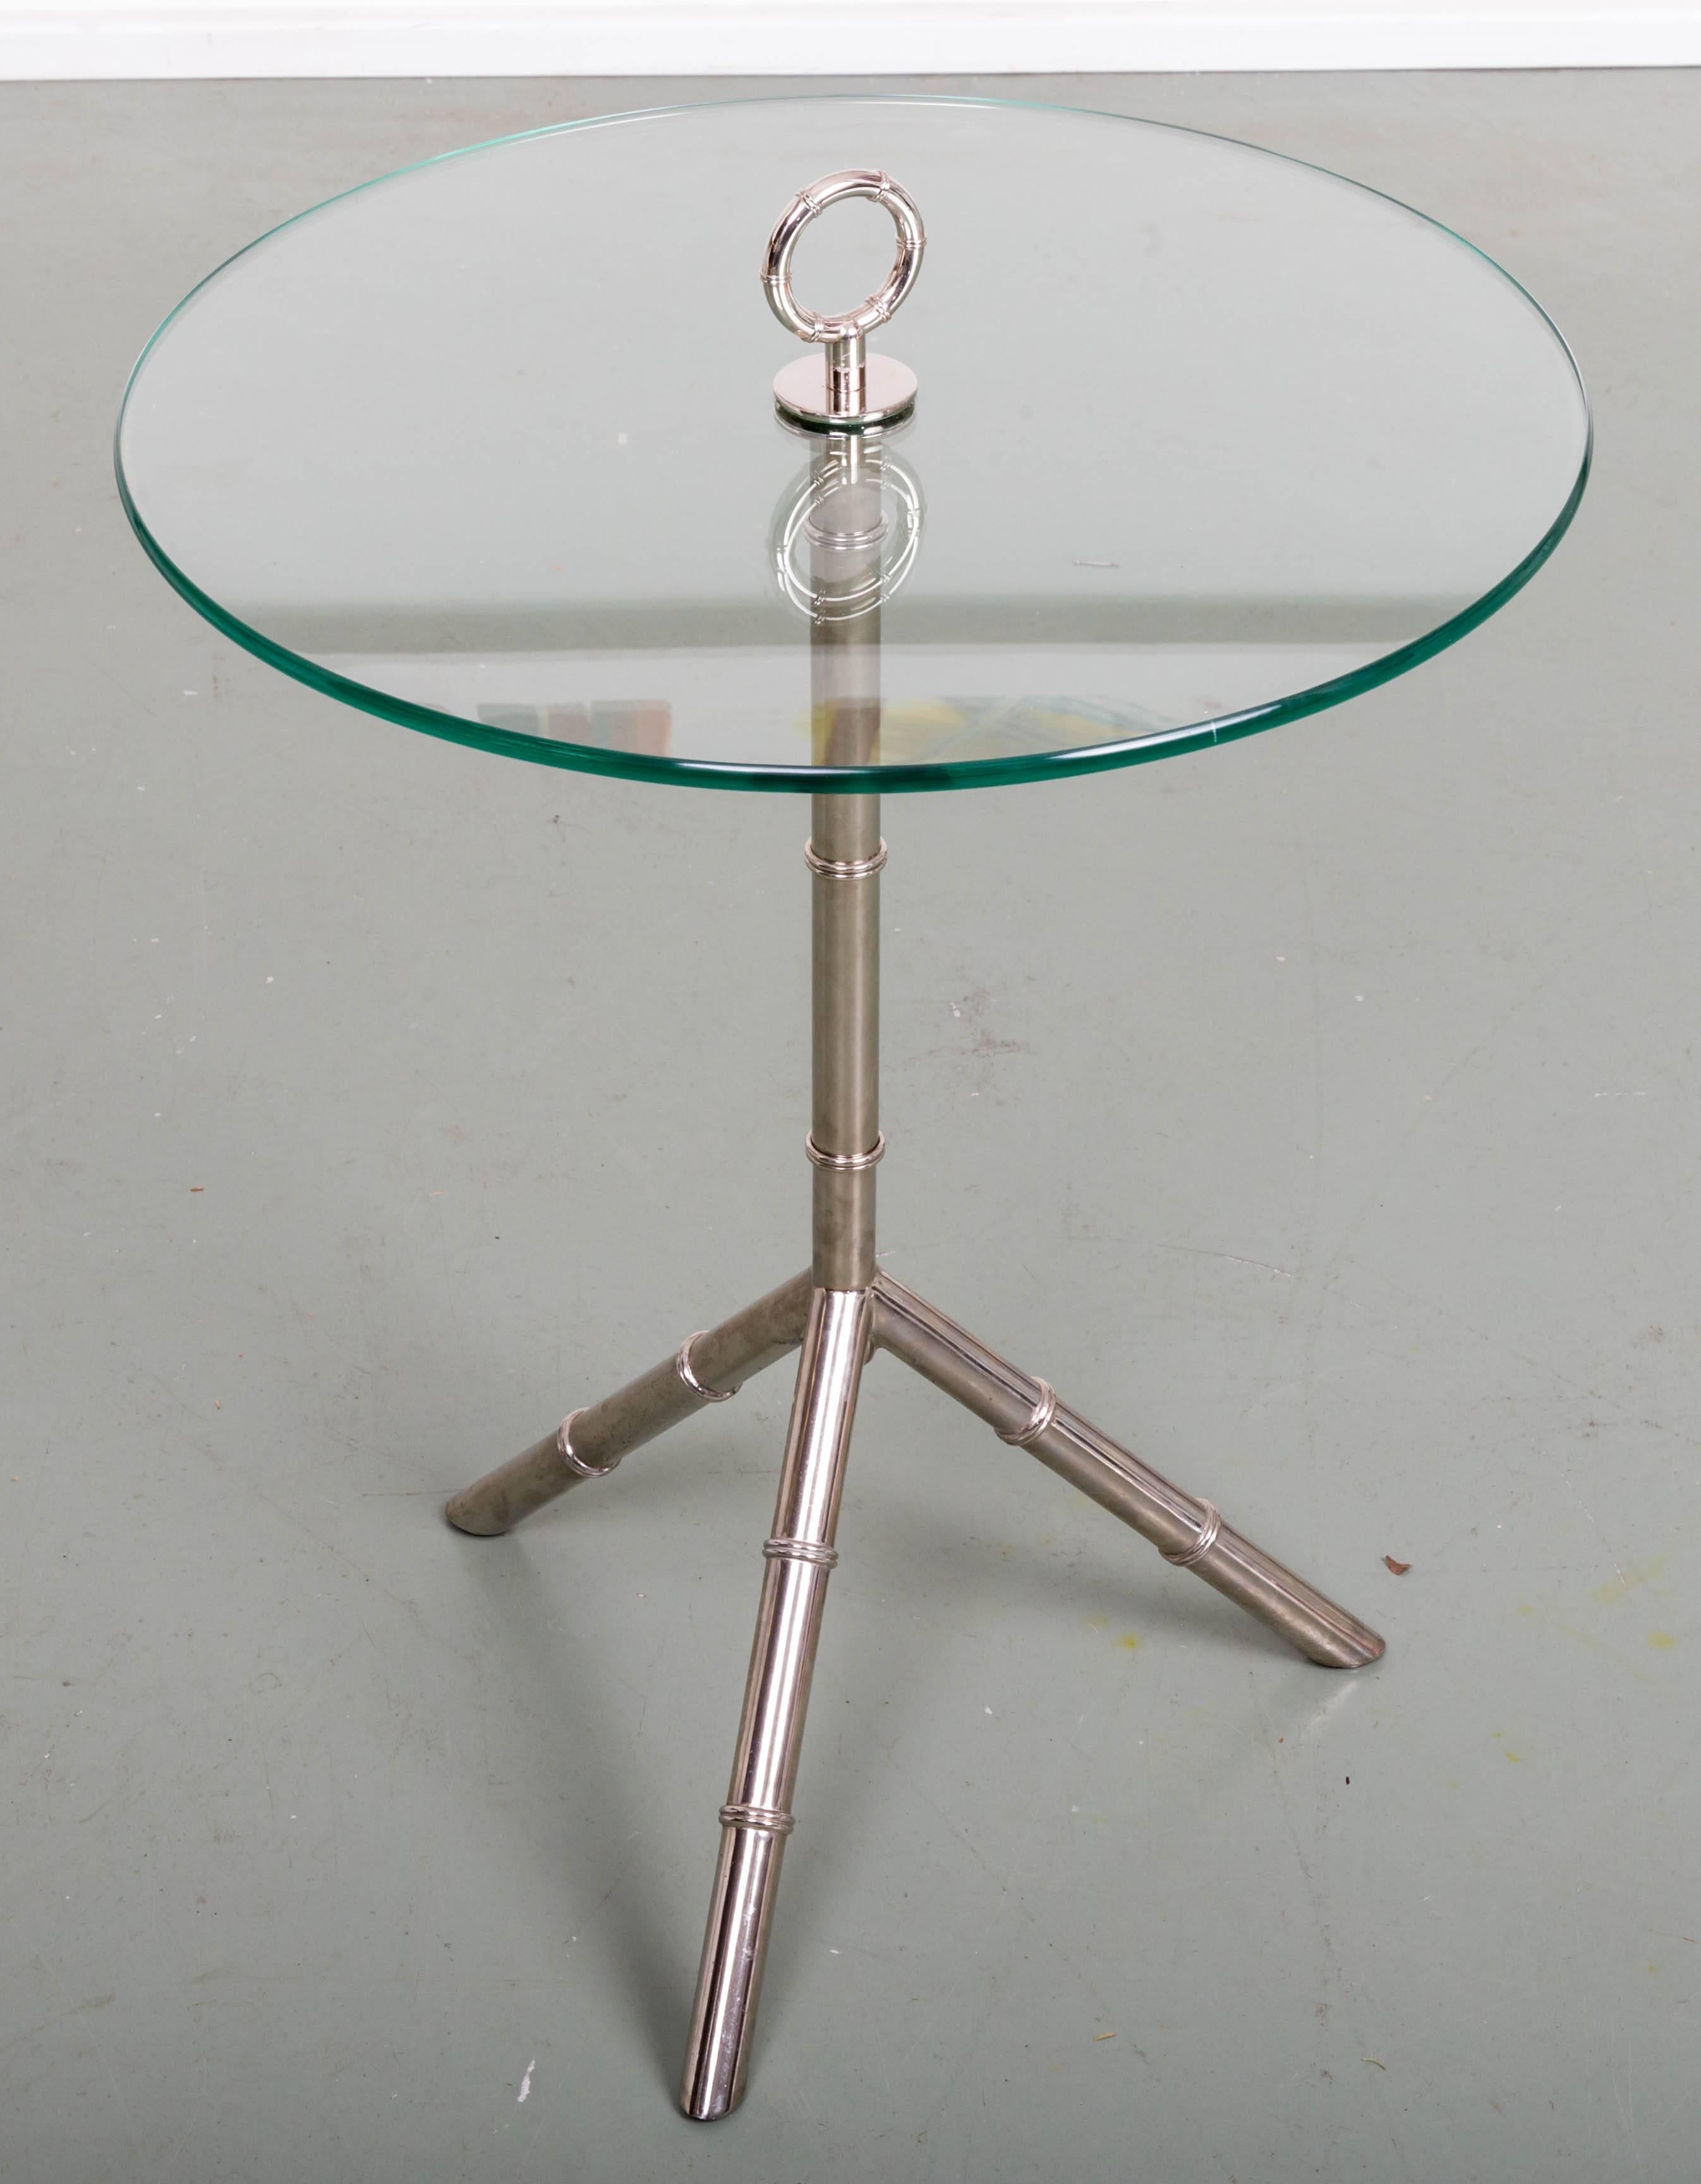 Small glass top side table with a faux bamboo chrome tripod stand with a round chrome handle.
Note: 24 inch height is to the top of the glass. The handle is 3.5 inches above.